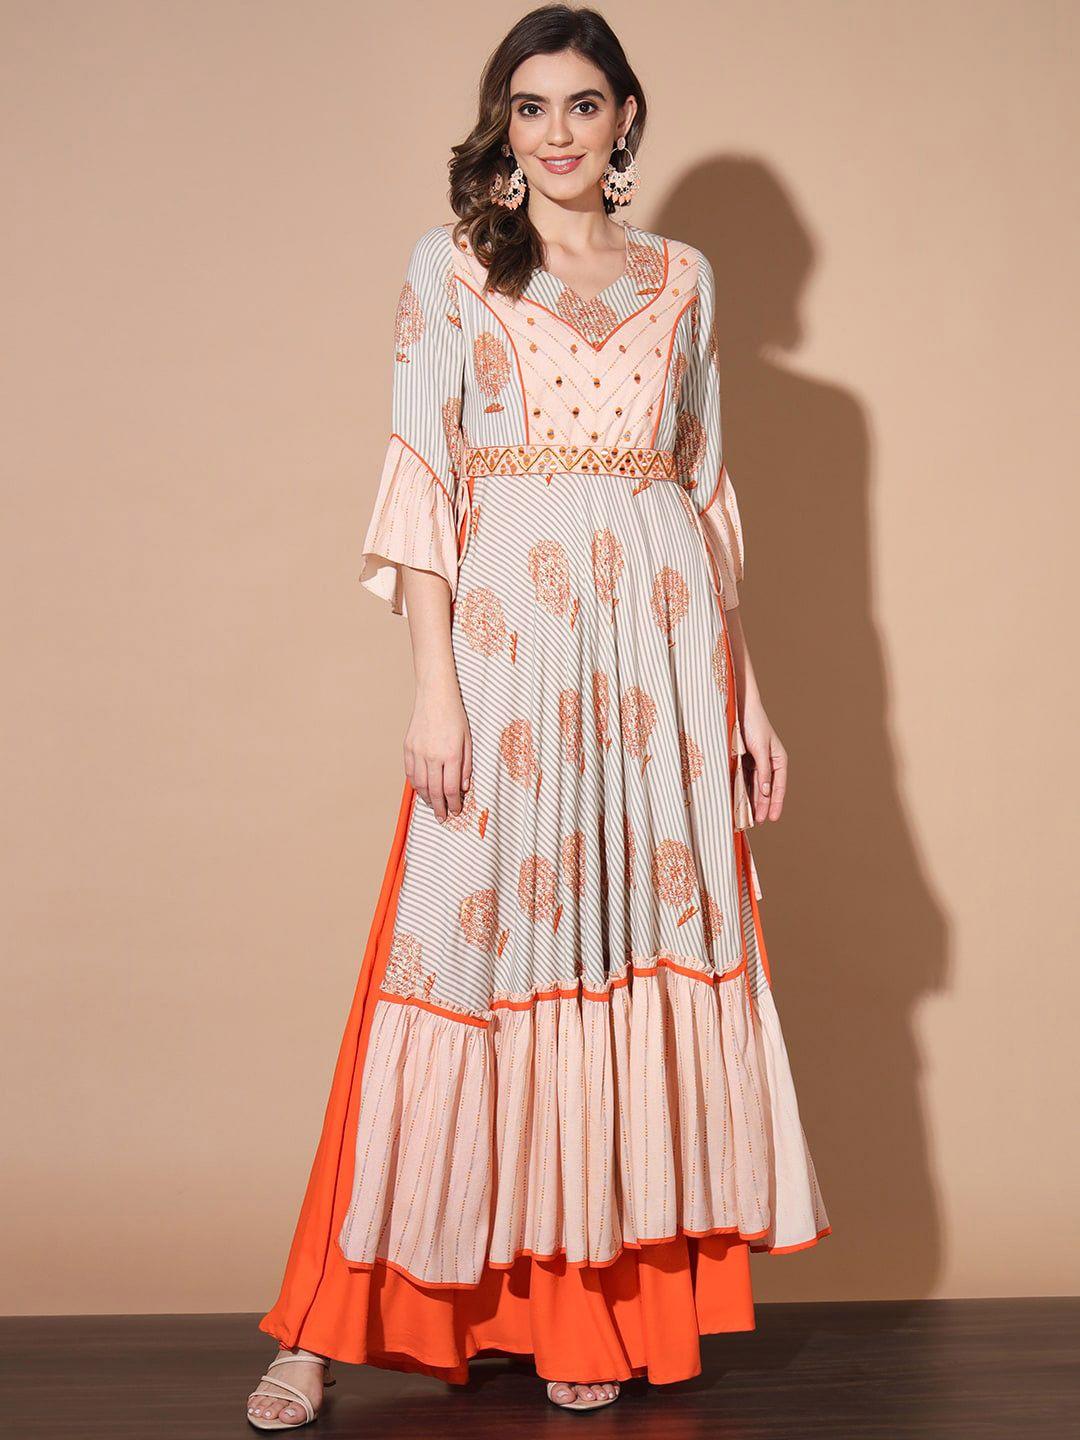 madhuram-ethnic-motifs-printed-bell-sleeves-embroidered-detailed-maxi-ethnic-dress